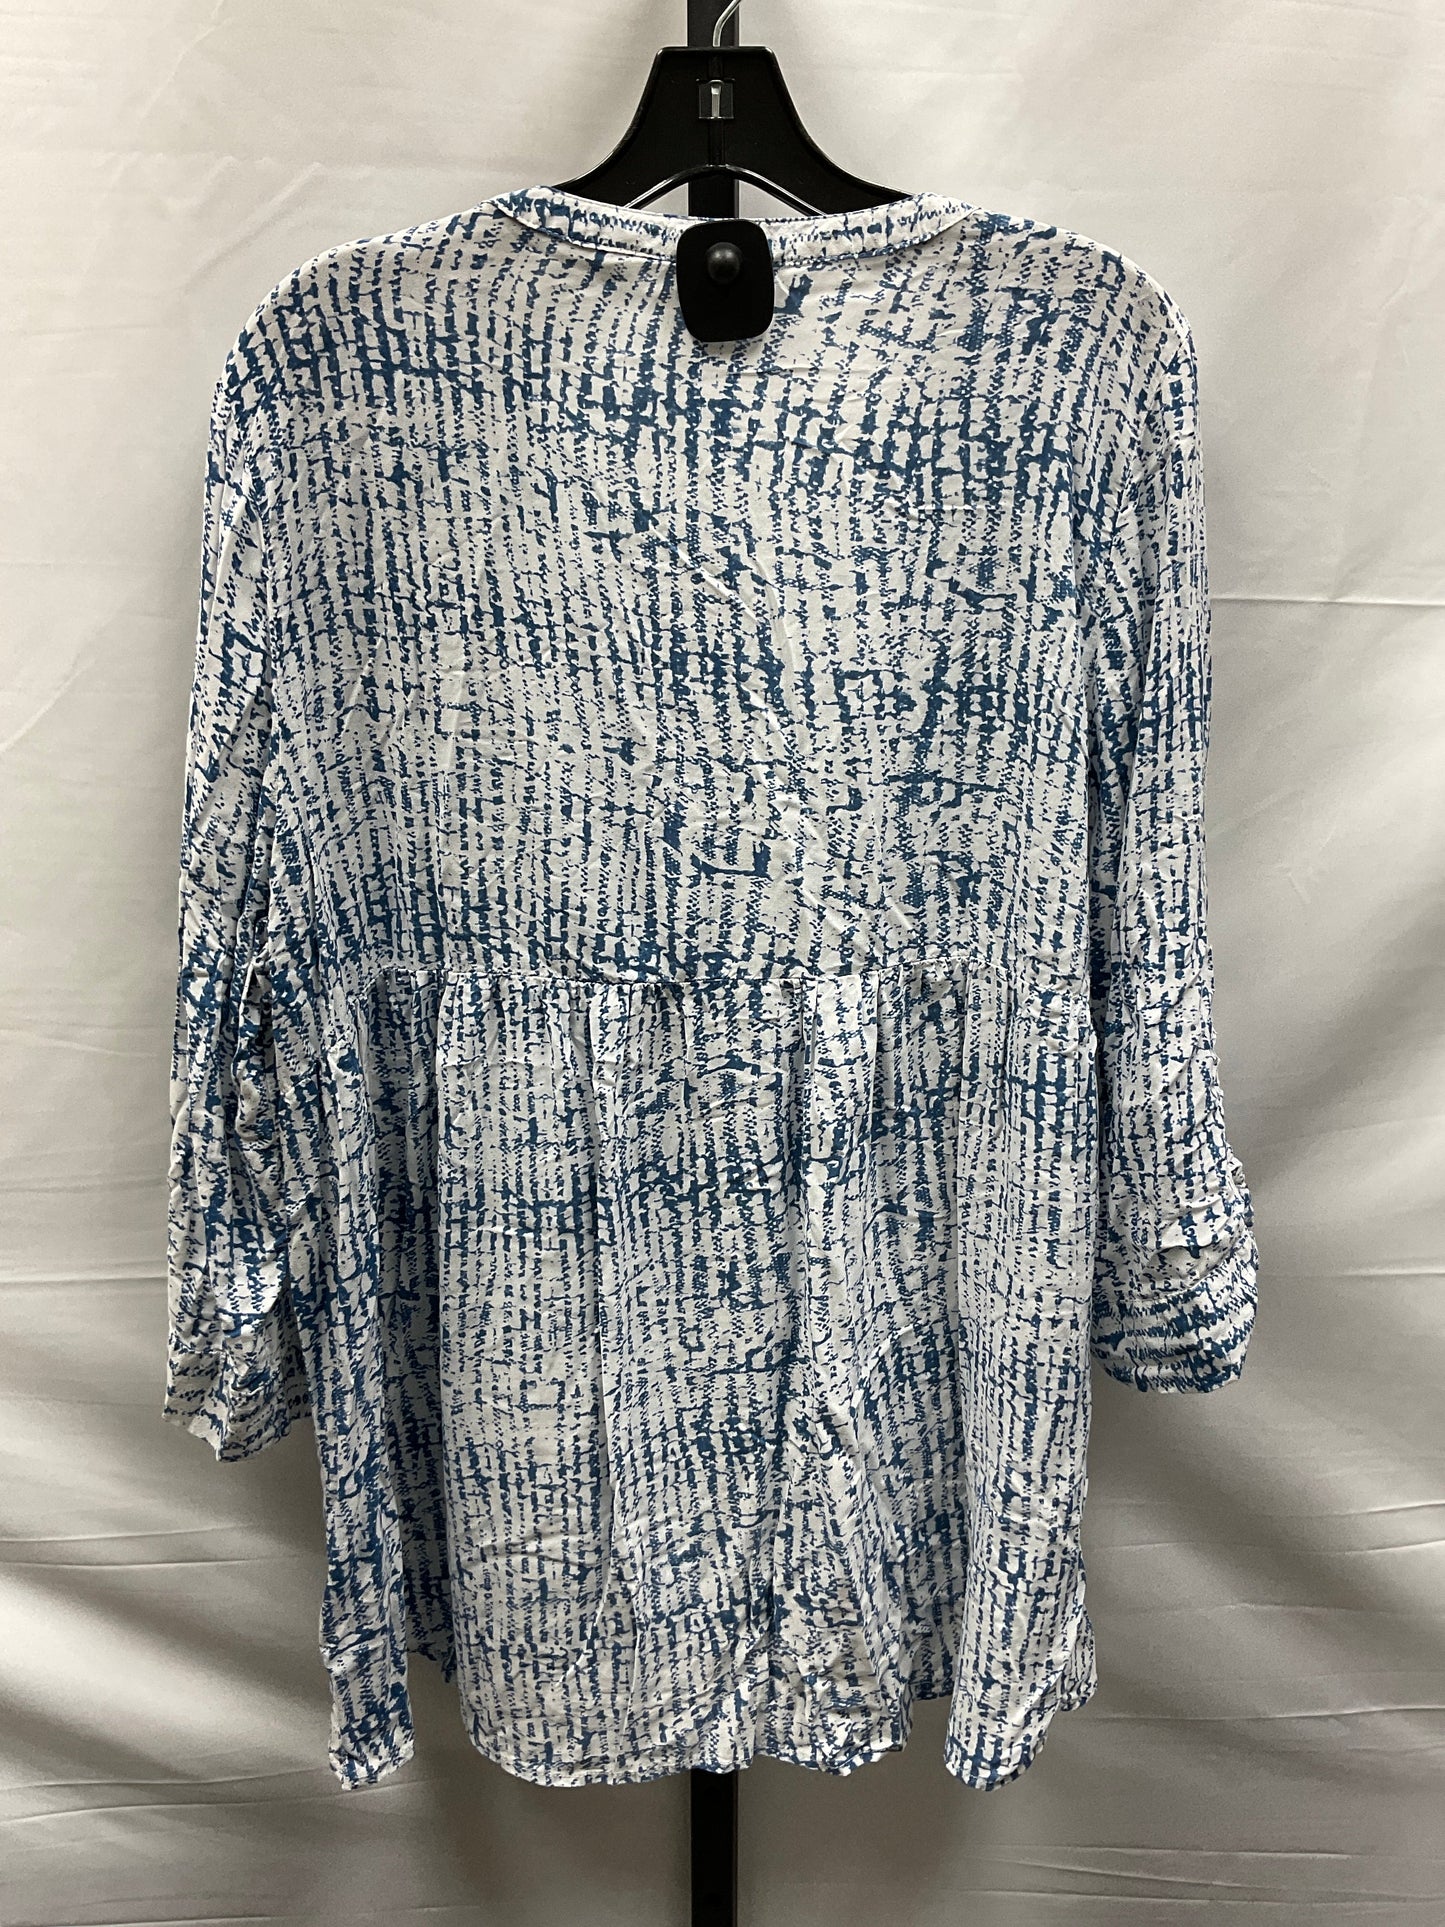 Blue & White Top Long Sleeve Jones And Co, Size 1x